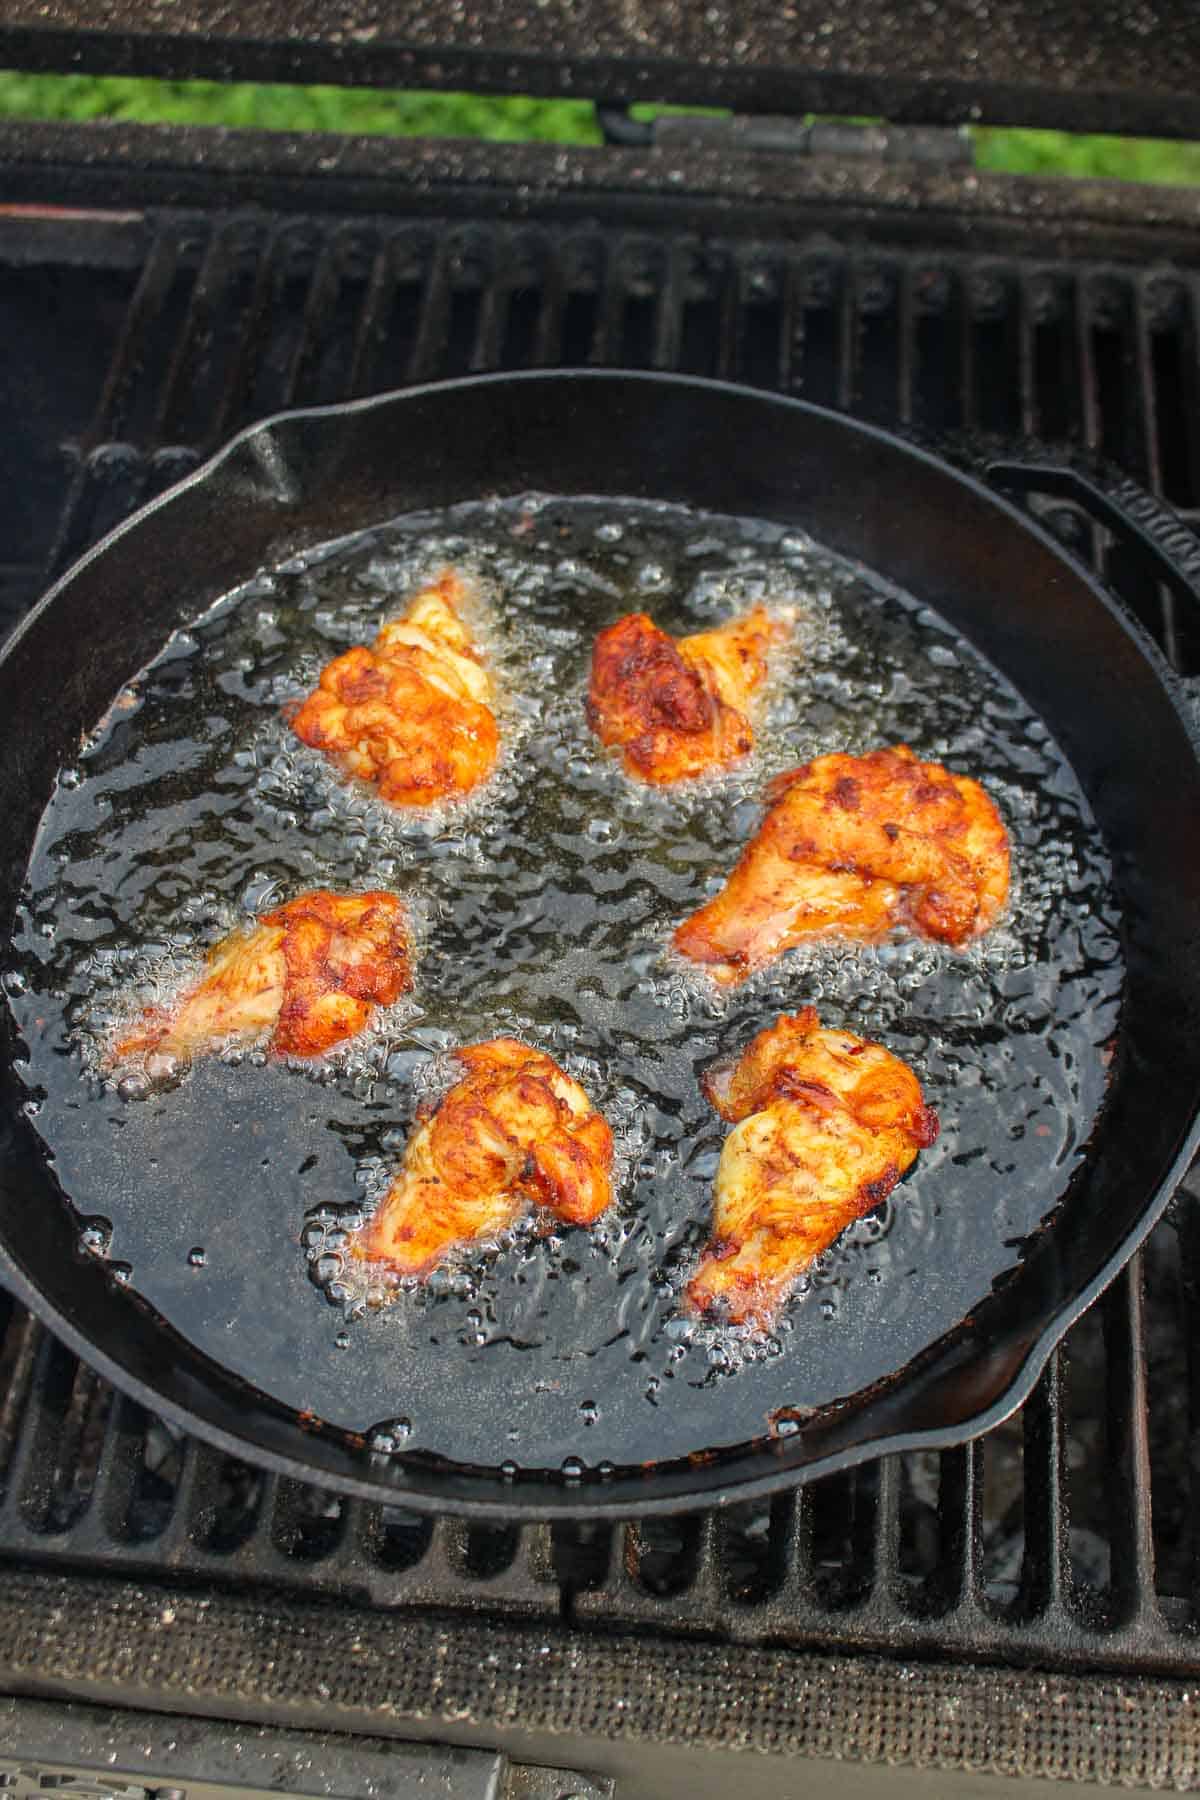 A batch of the smoked wings frying on the grill.